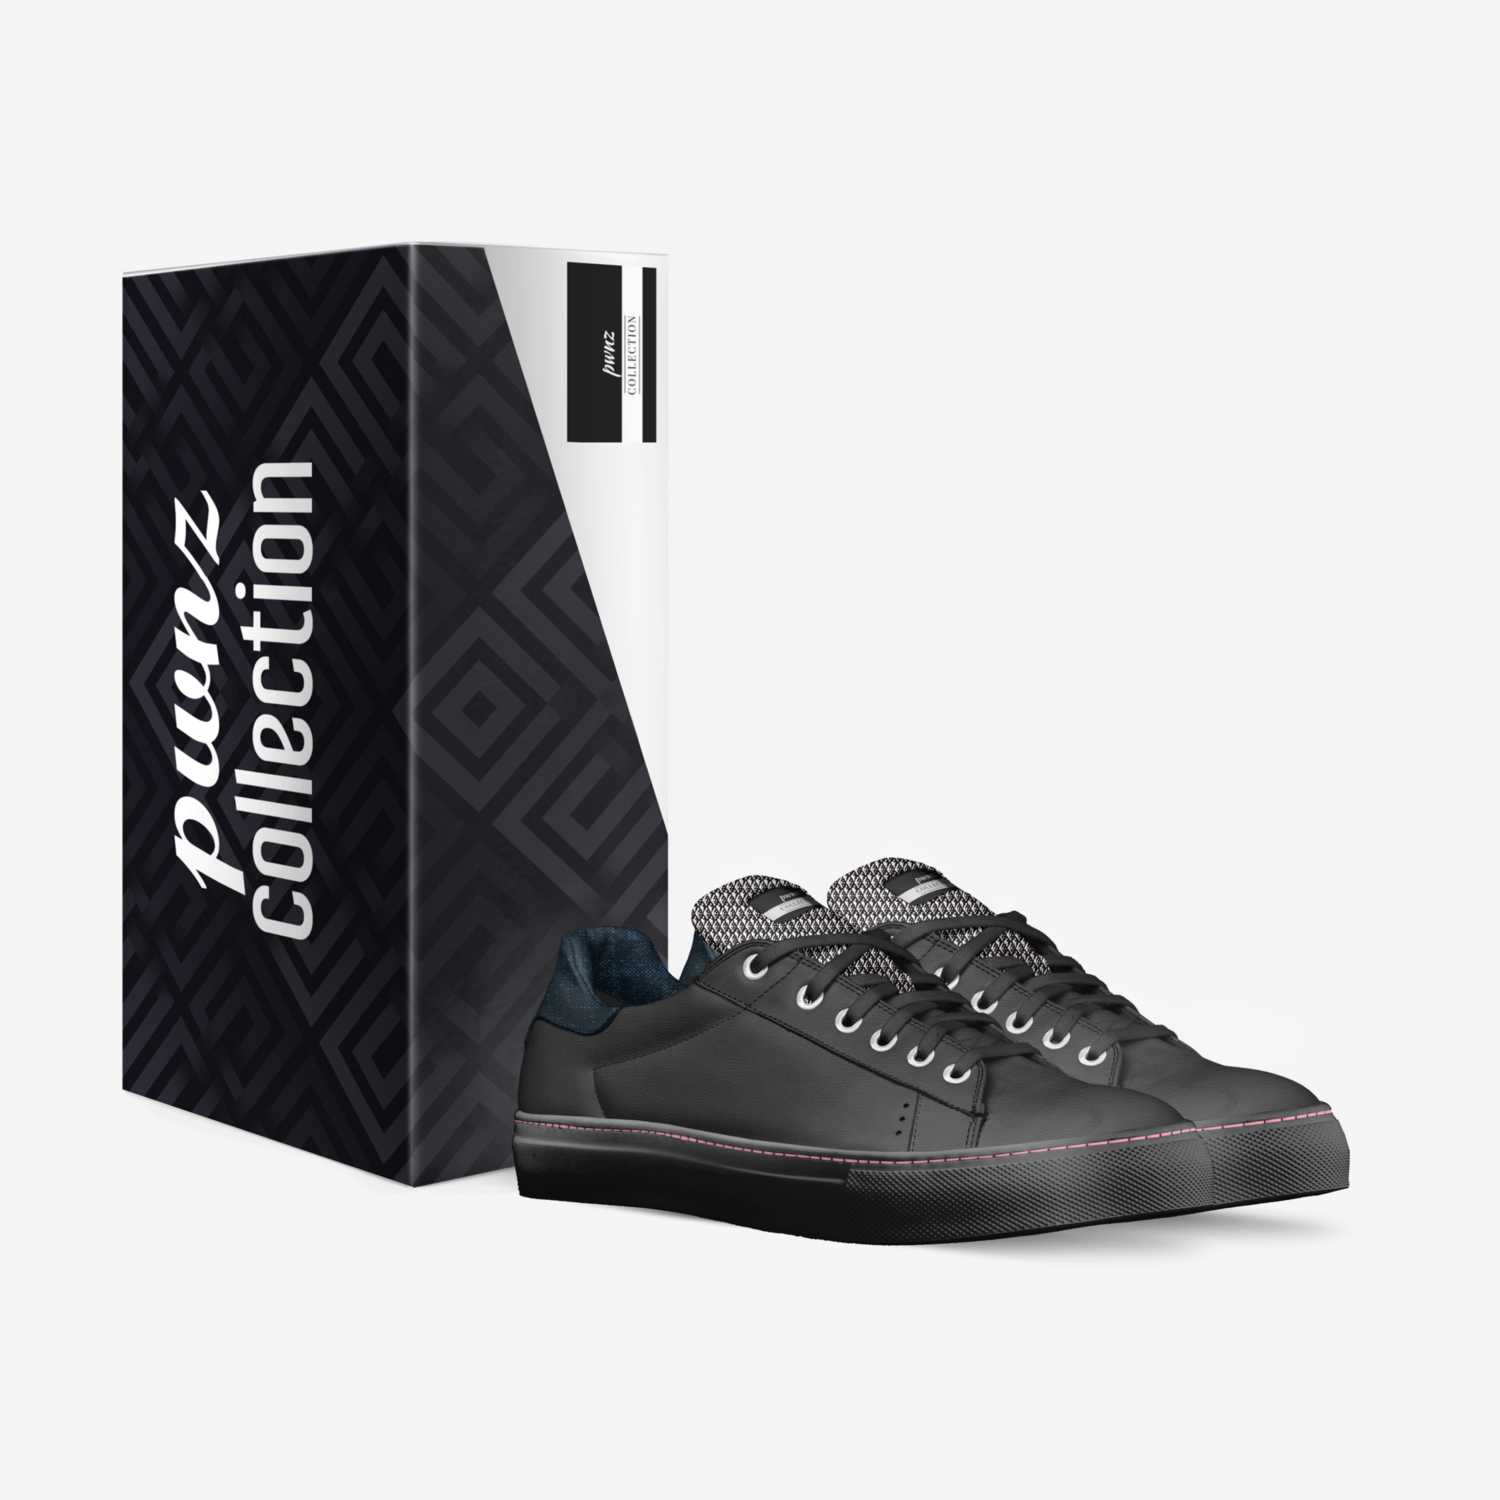 pwnz custom made in Italy shoes by Ashton Giddings | Box view